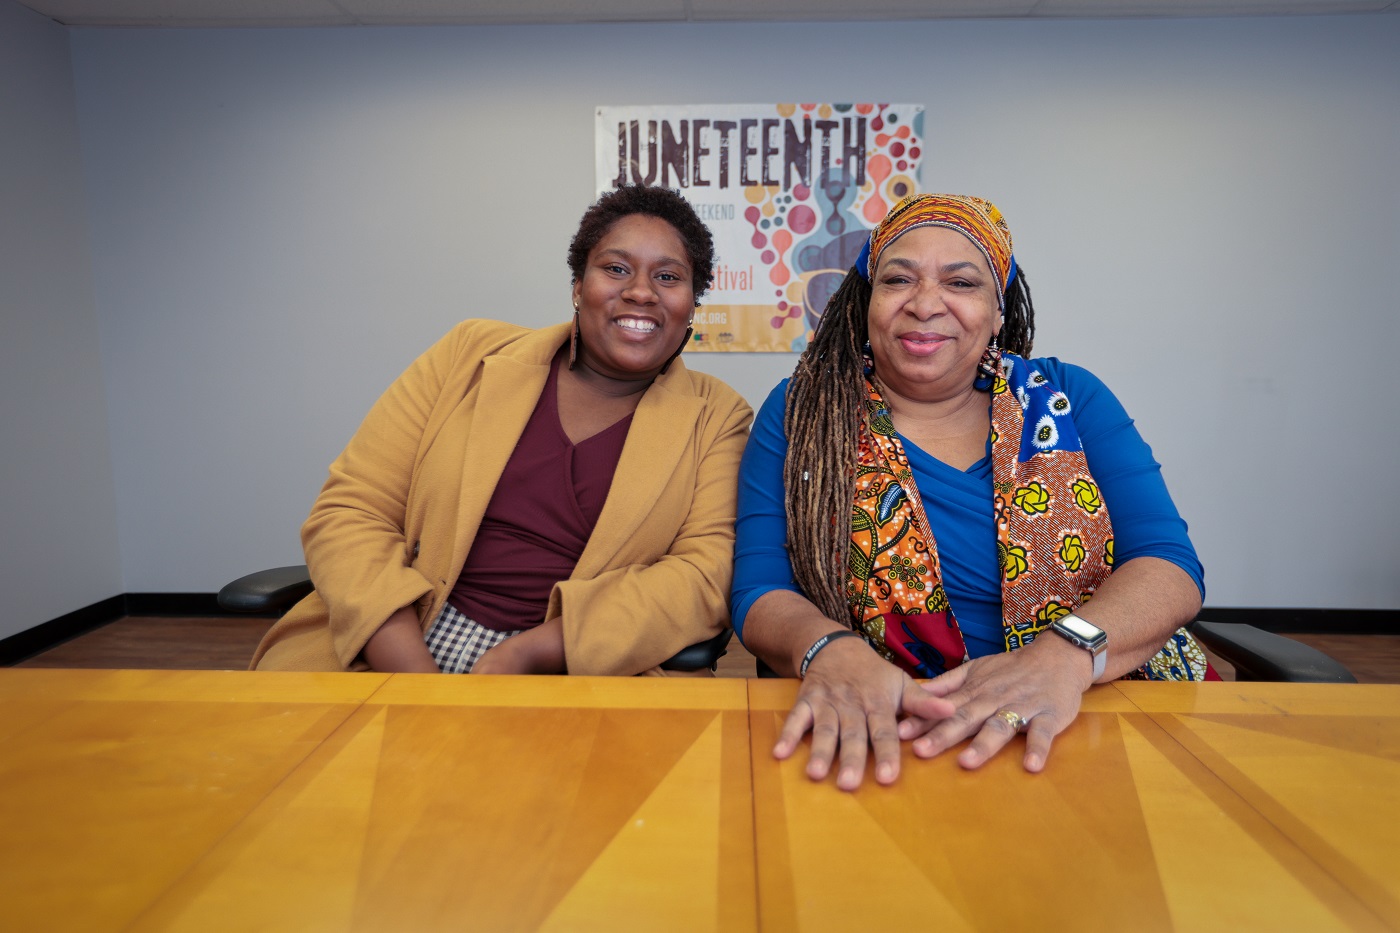 (L–R) With Project Success Coalition, Harambee Youth Council Advisor Terri Hughes and Director Betty Sawyer uplift Utah’s Black community through events, educational initiatives and more.